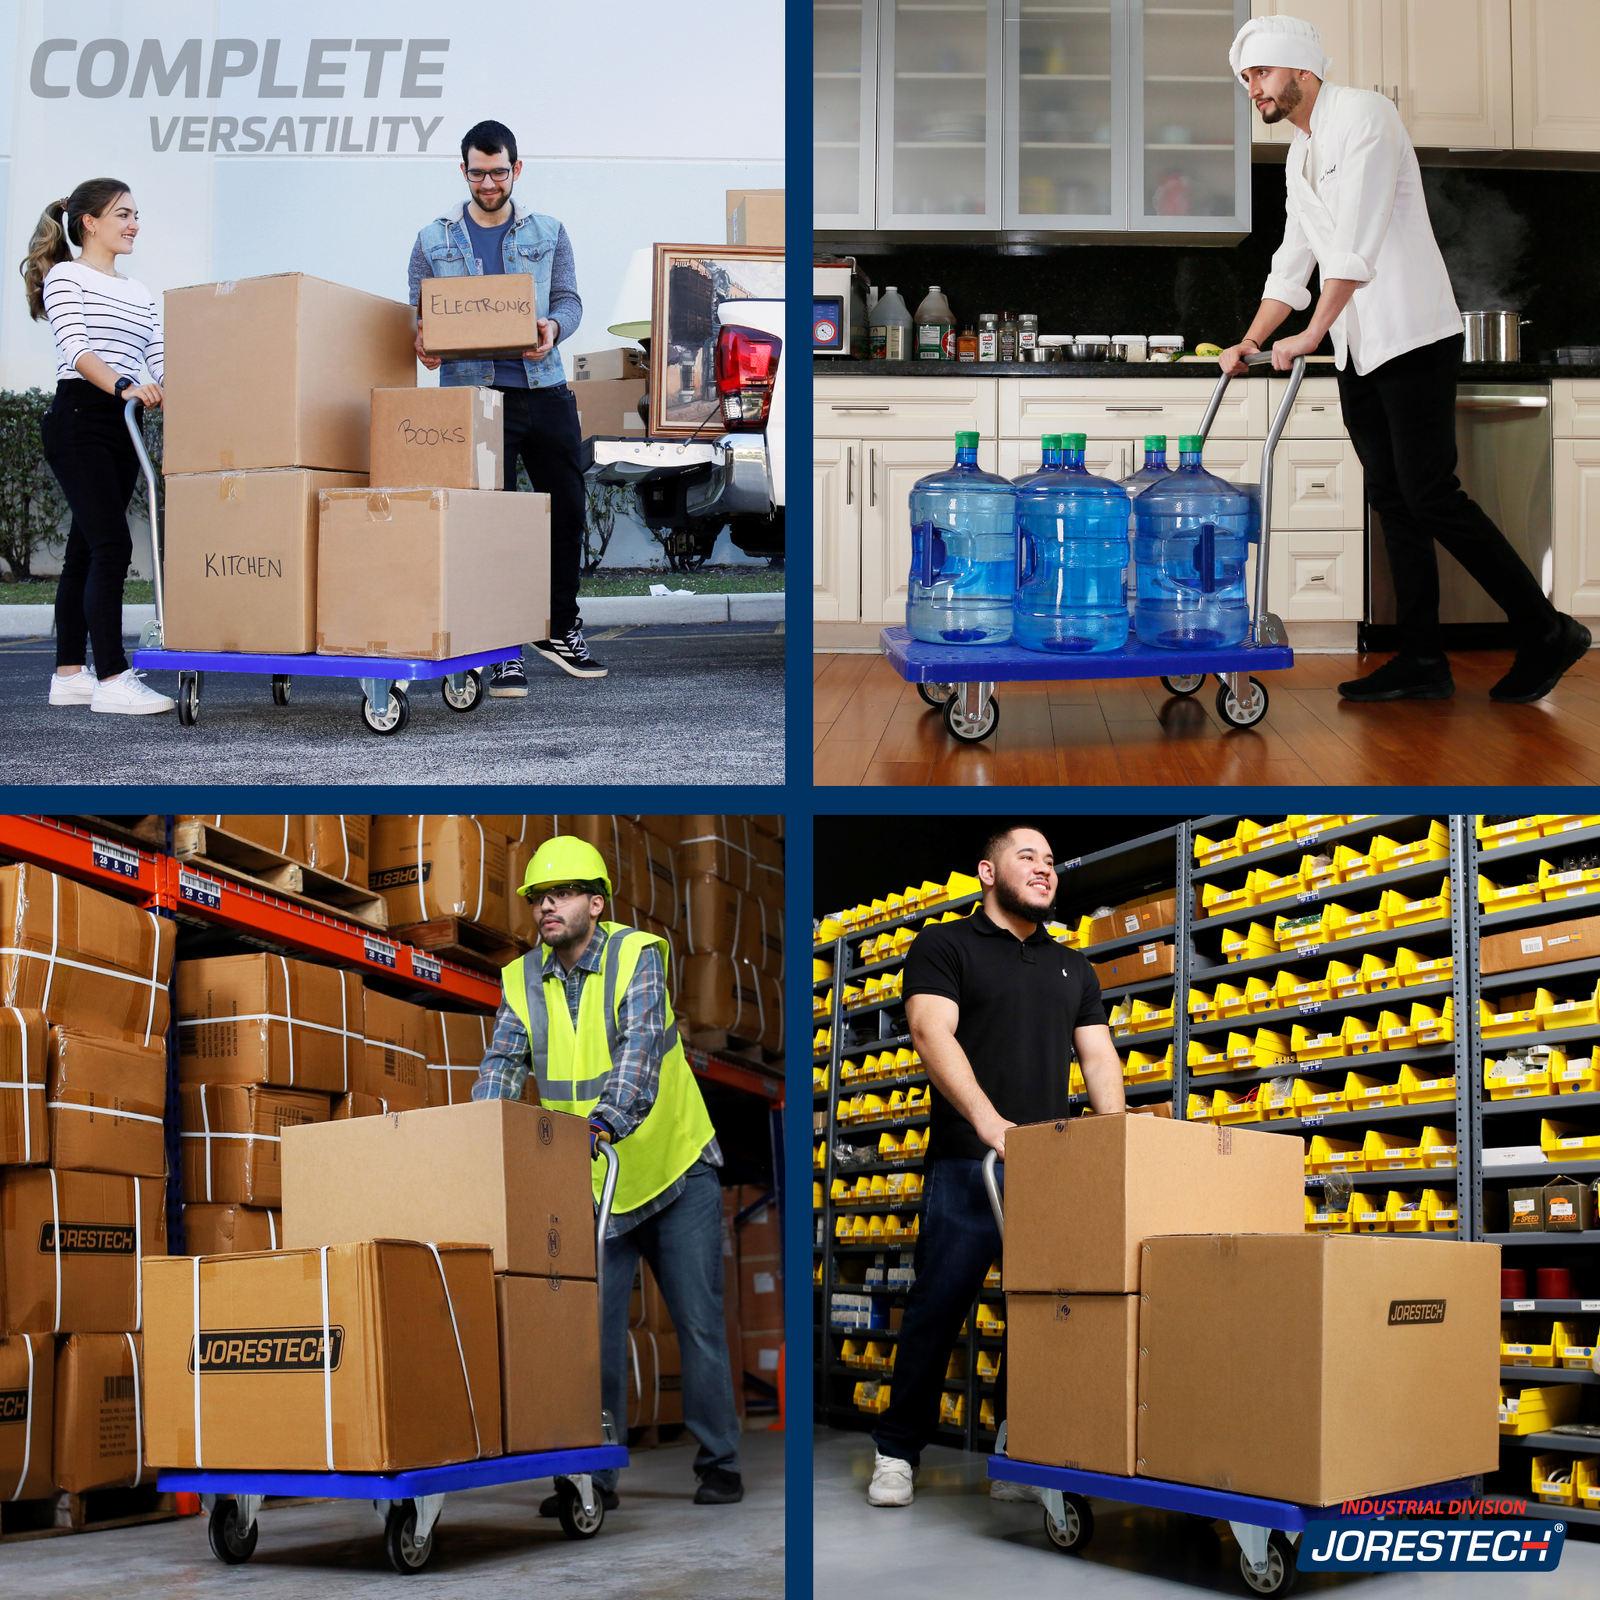 Split banner in four showing the JORES TECHNOLOGIES® foldable platform cart being used for moving belongings, in a professional kitchen transporting large water jugs, and in  two different warehouses departments